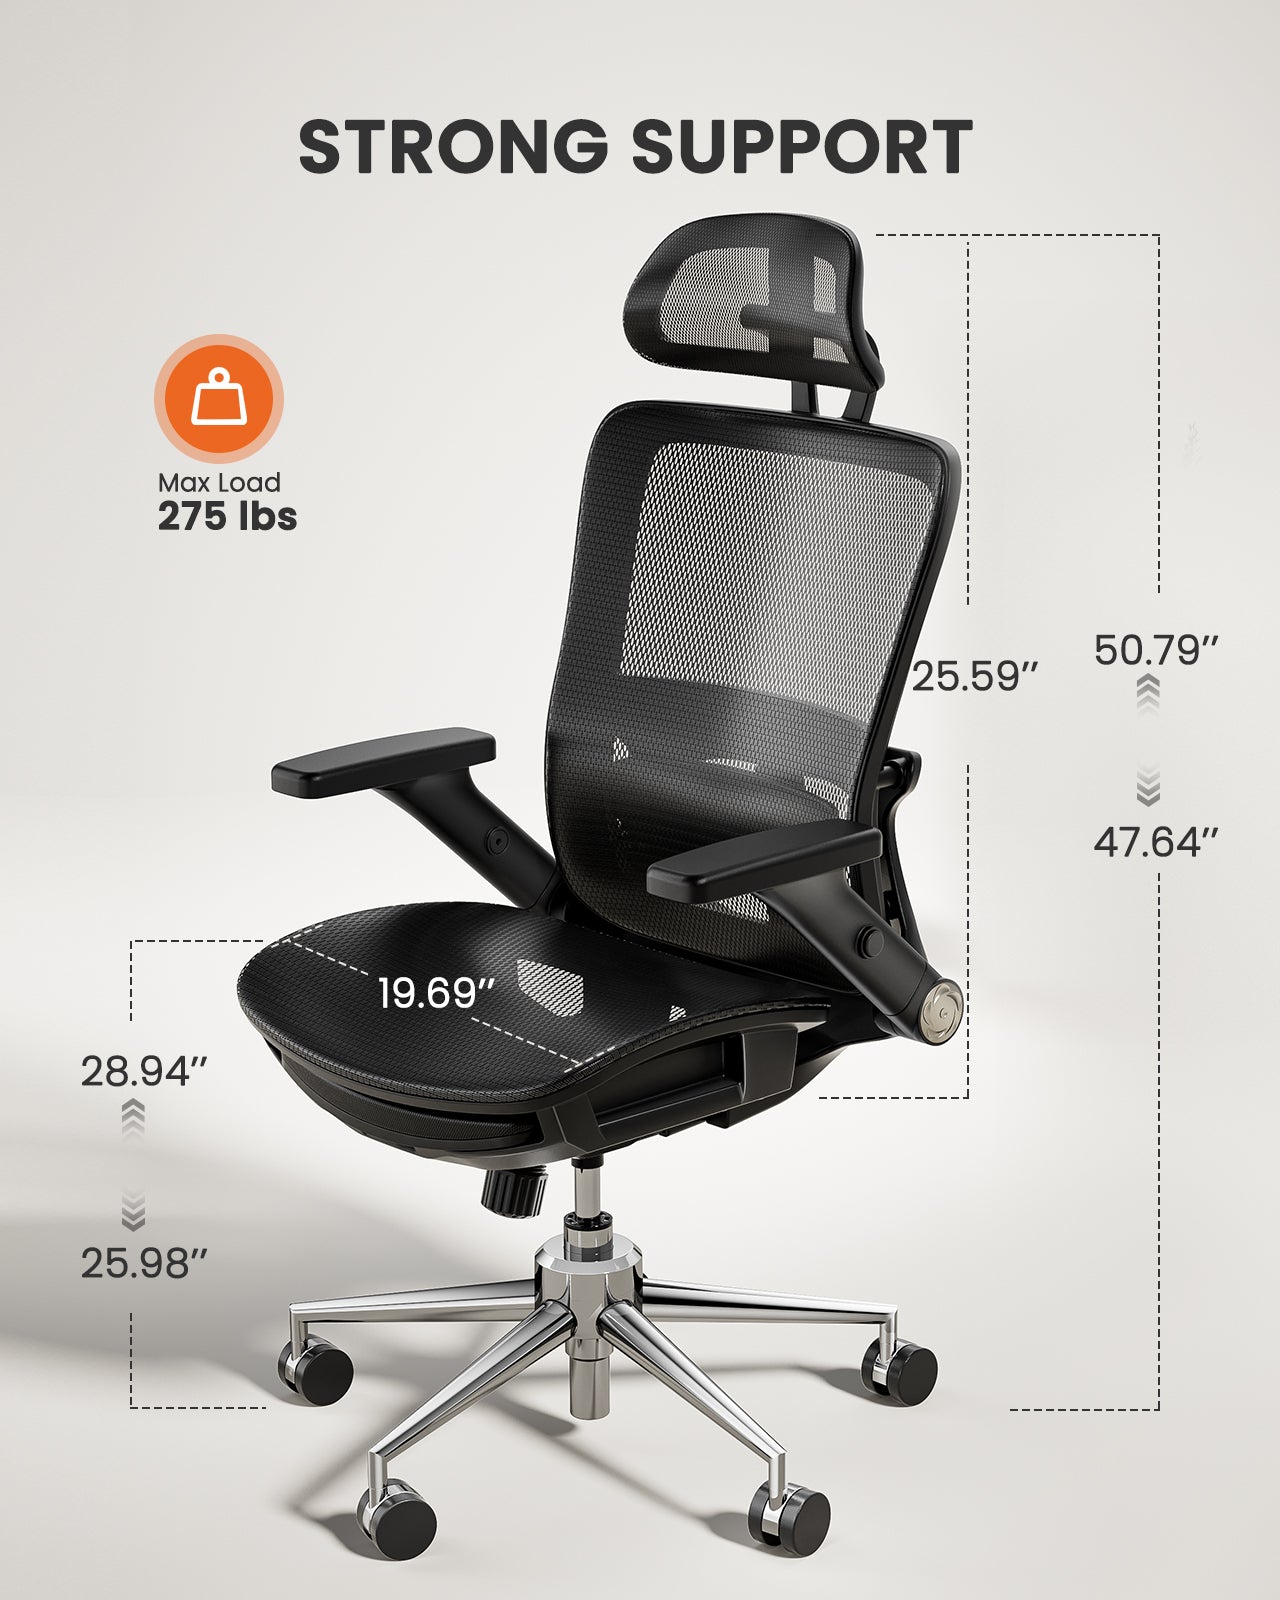 Reclining Office Chair with Foot Rest, Mesh Office Chair